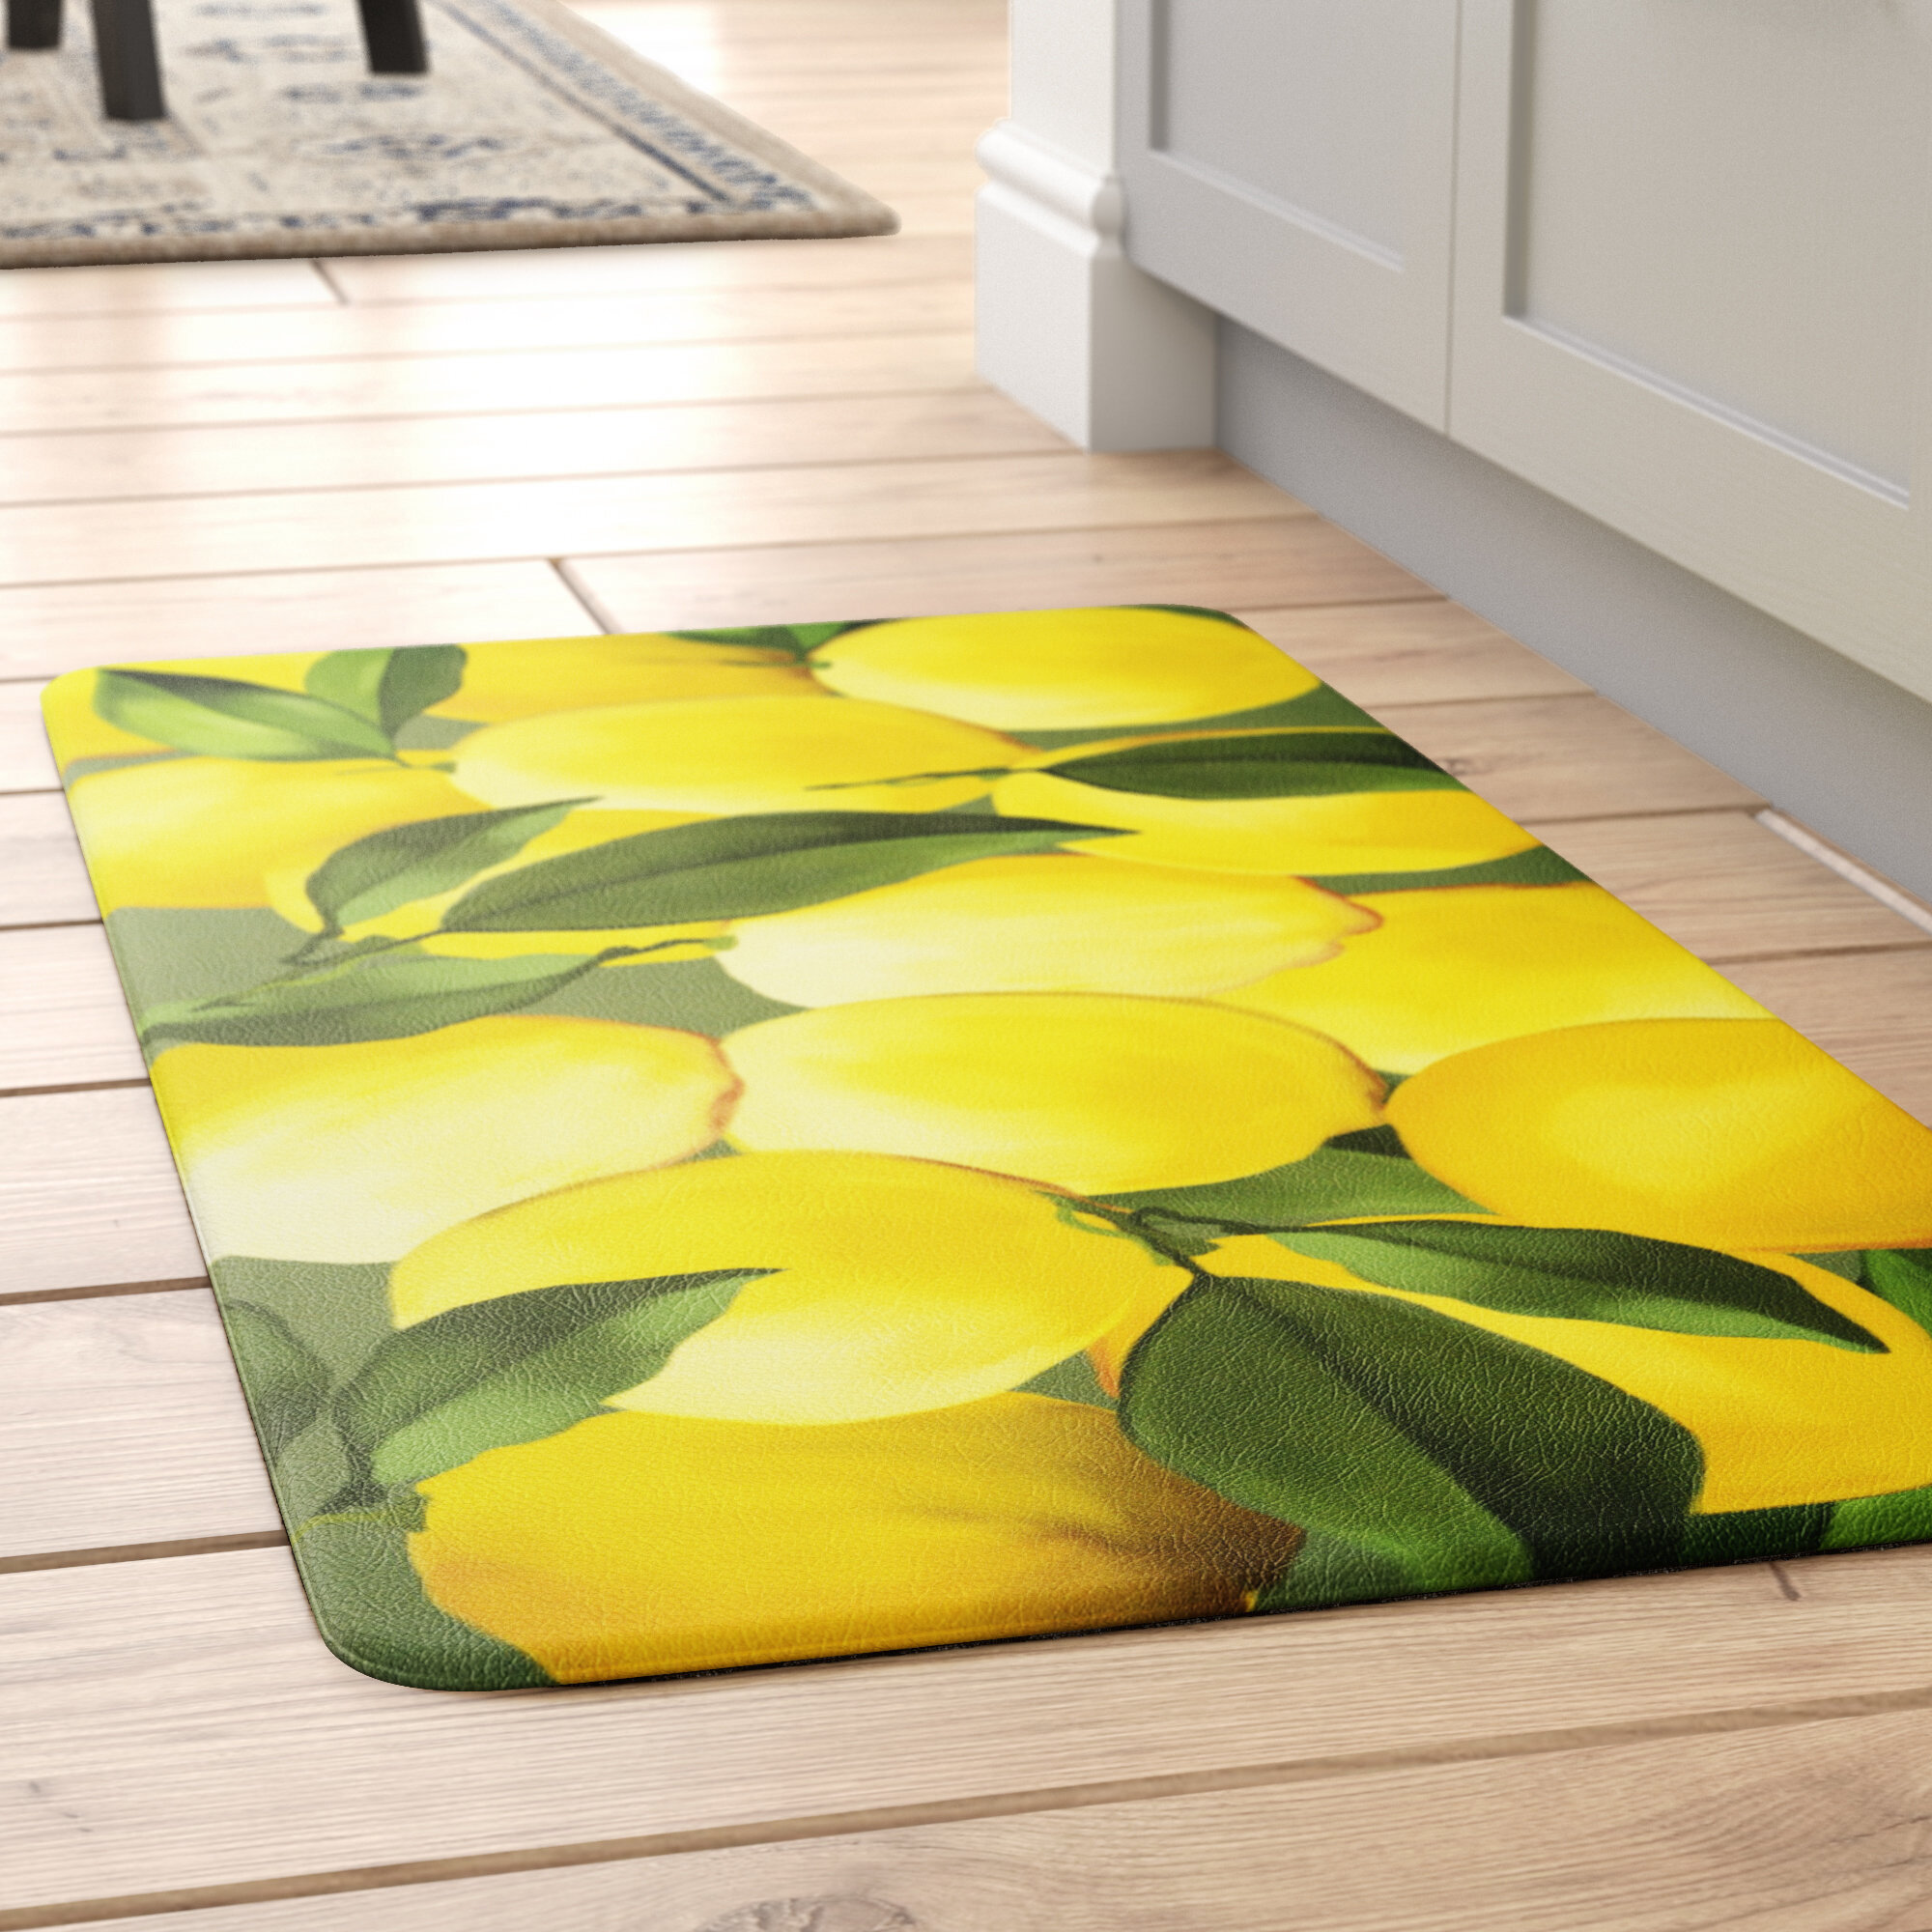 Area Rugs Lemon Floral Stain Resistant Water Absorption Rug Pads Wear Resistant Non Slip Carpet for Bedroom Living Room Kitchen Dorm Playroom Office 48in x 72inch